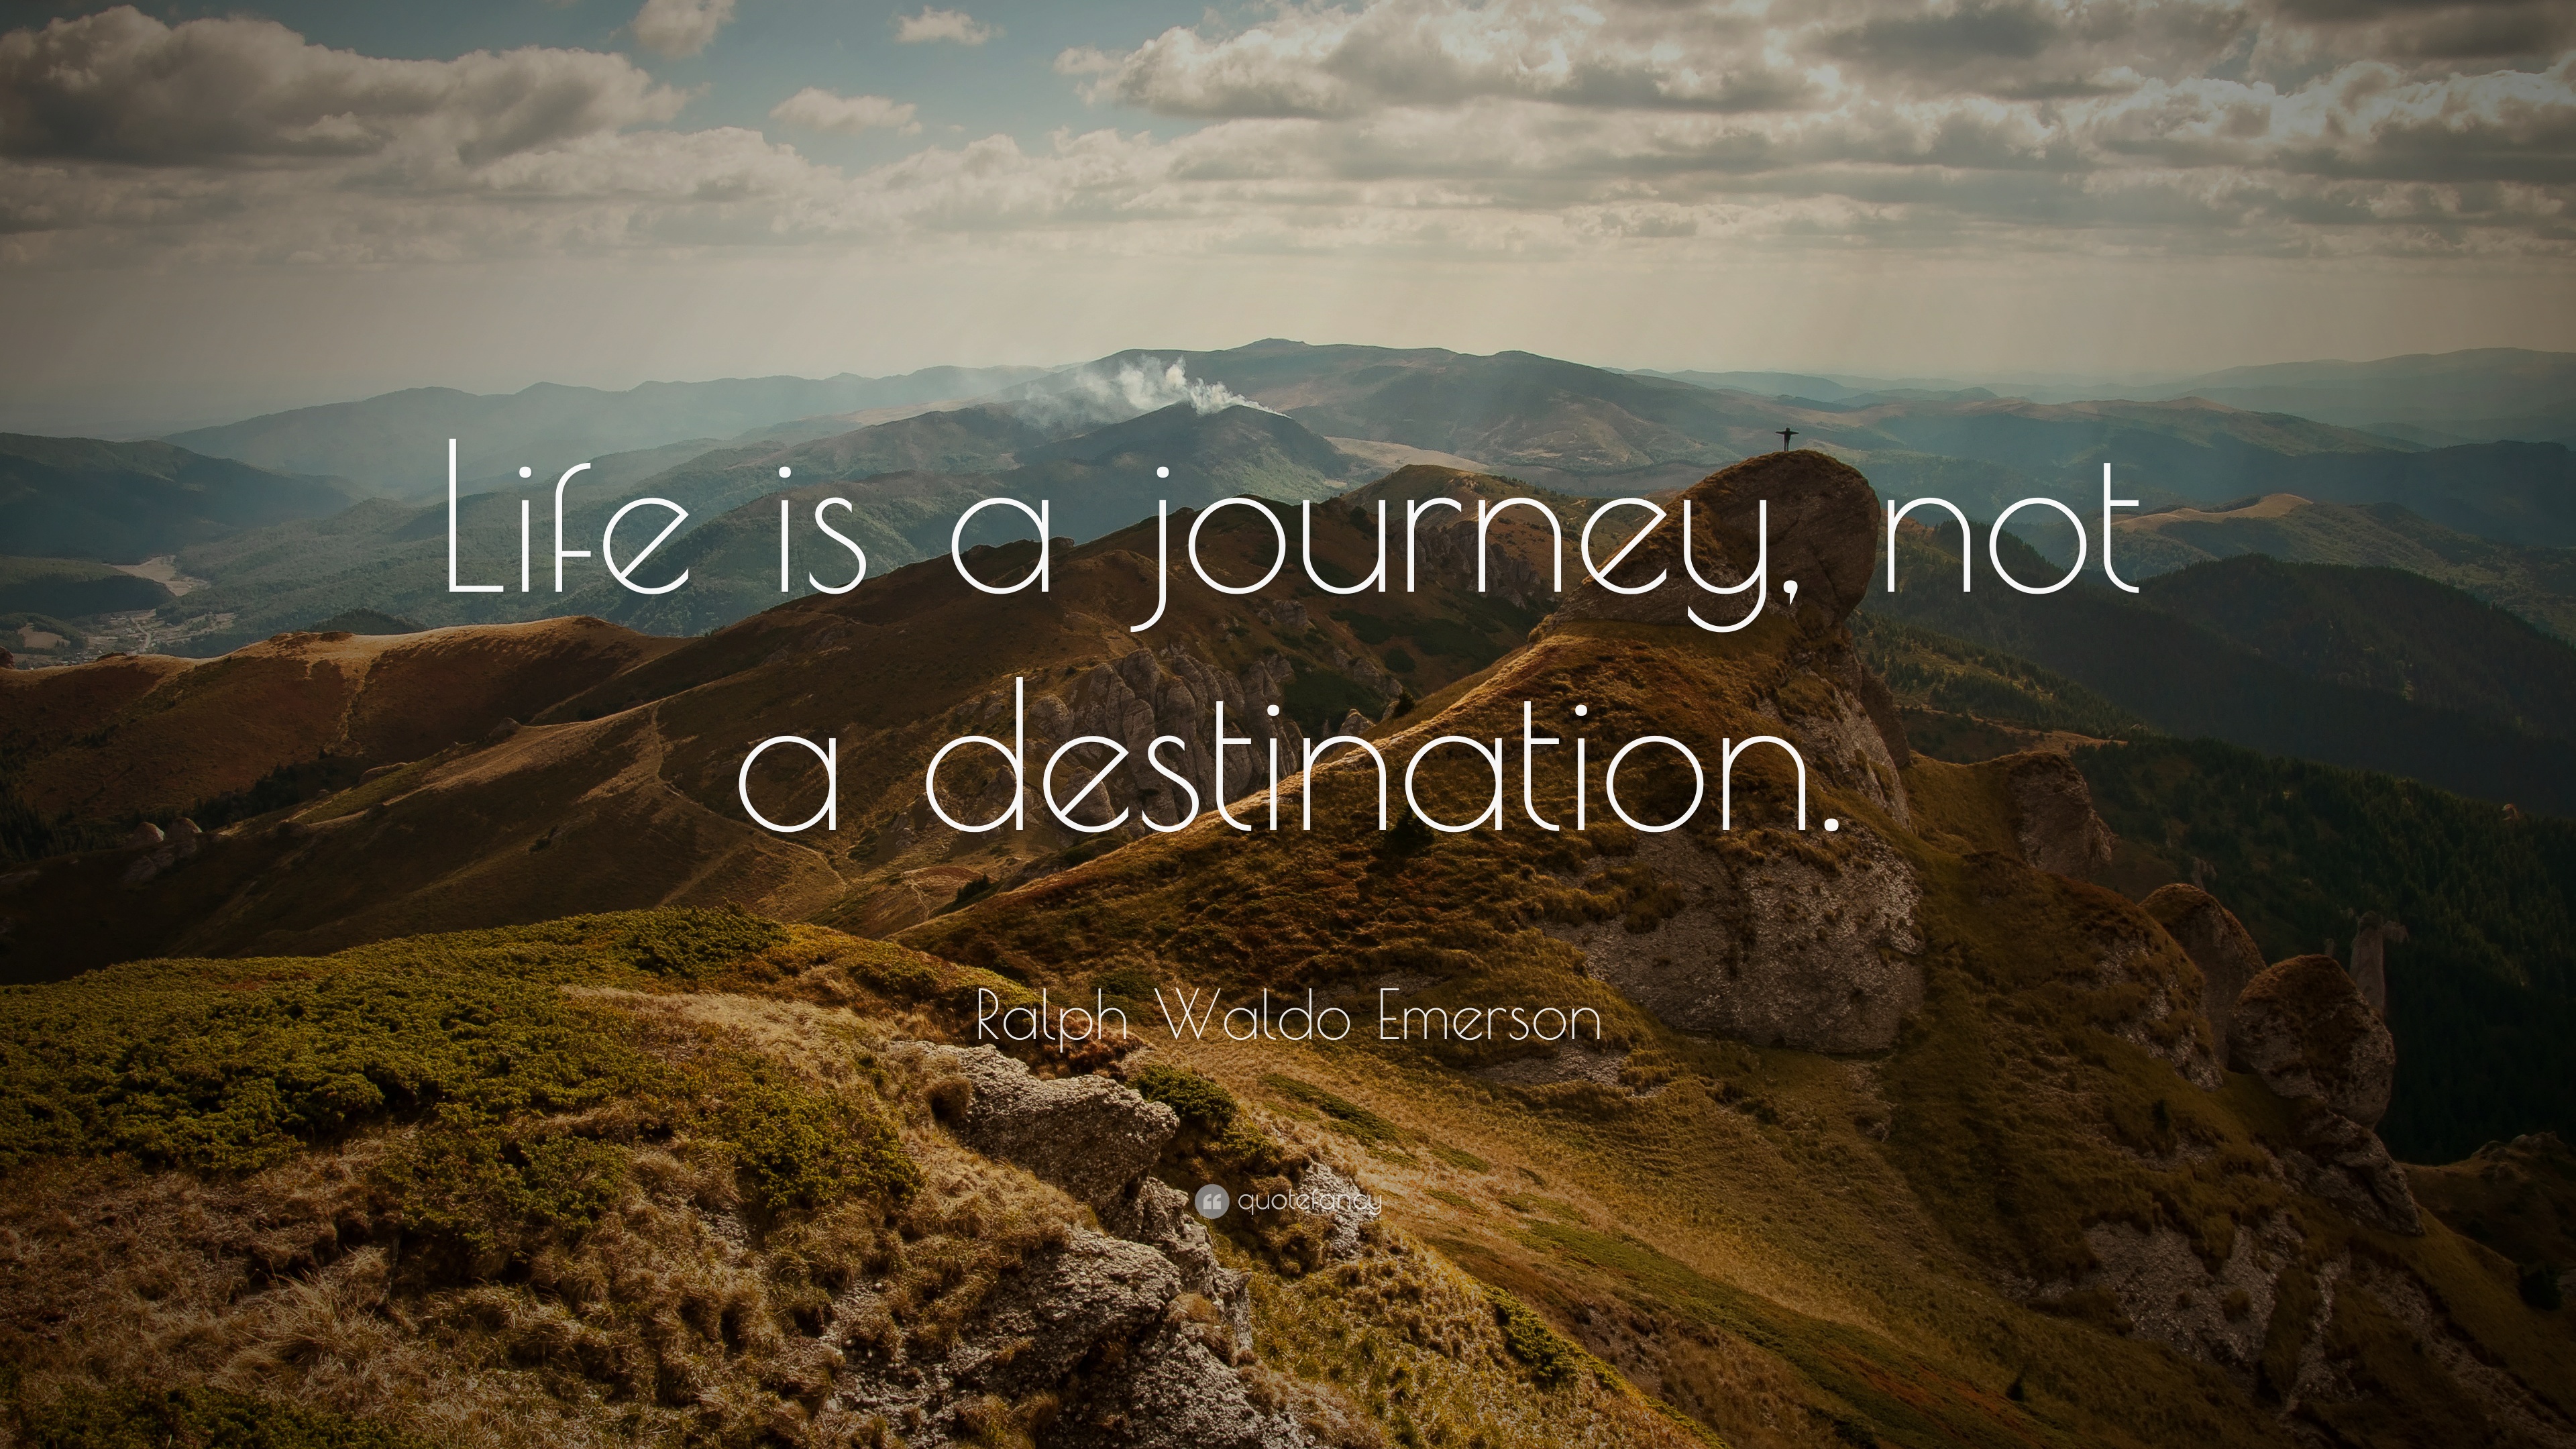 Ralph-Waldo-Emerson-Quote-Life-is-a-journey-not-a-destination ...